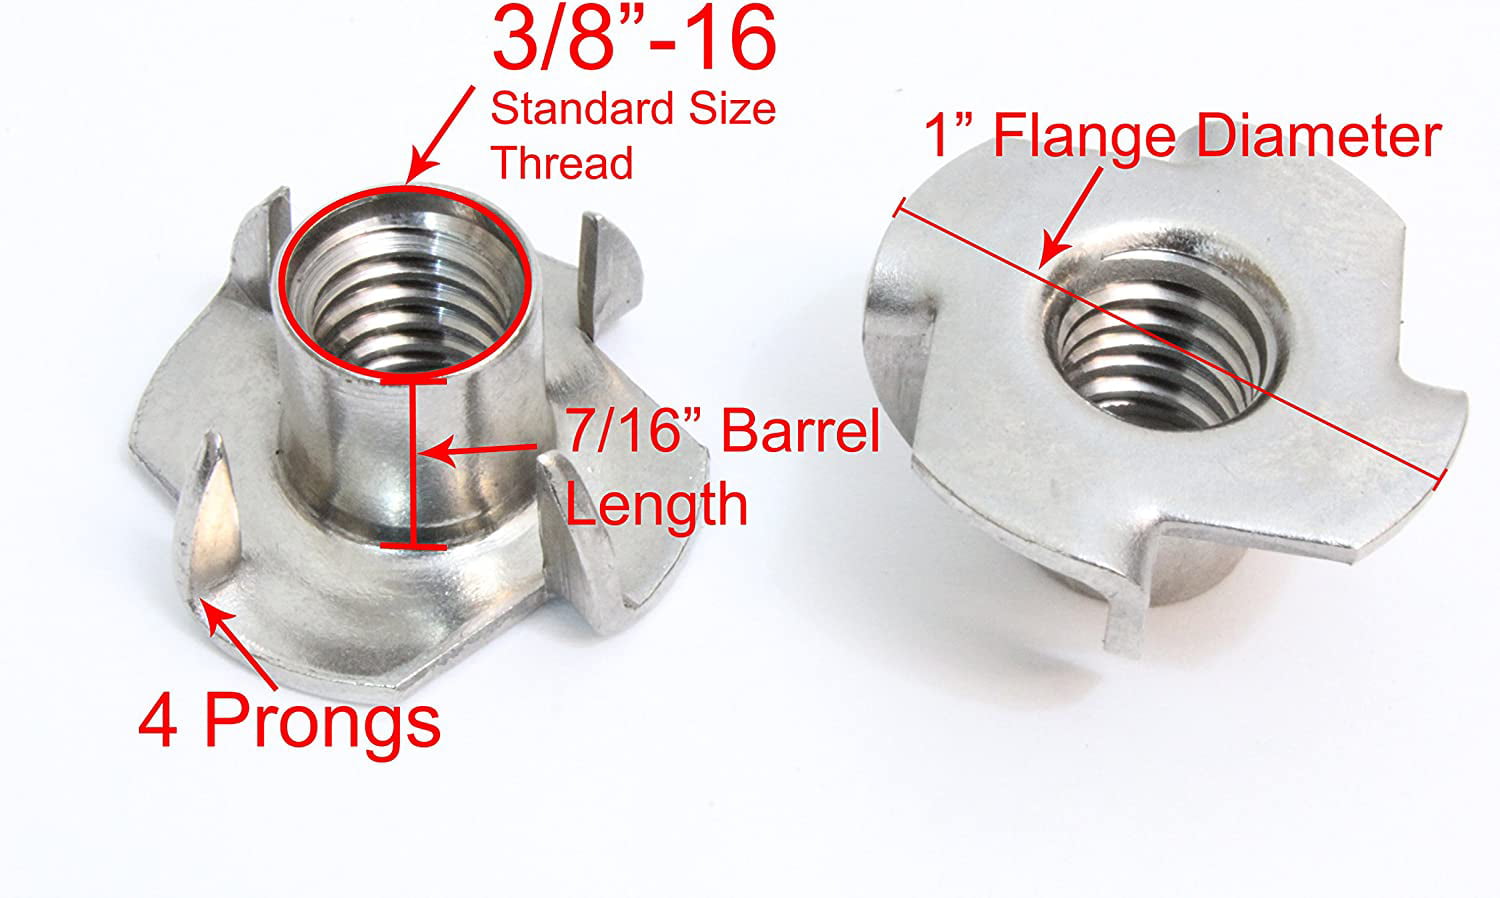 25-Pack Threaded Insert Stainless Steel Pronged T-Nuts 1/4"-20 x 7/16" 